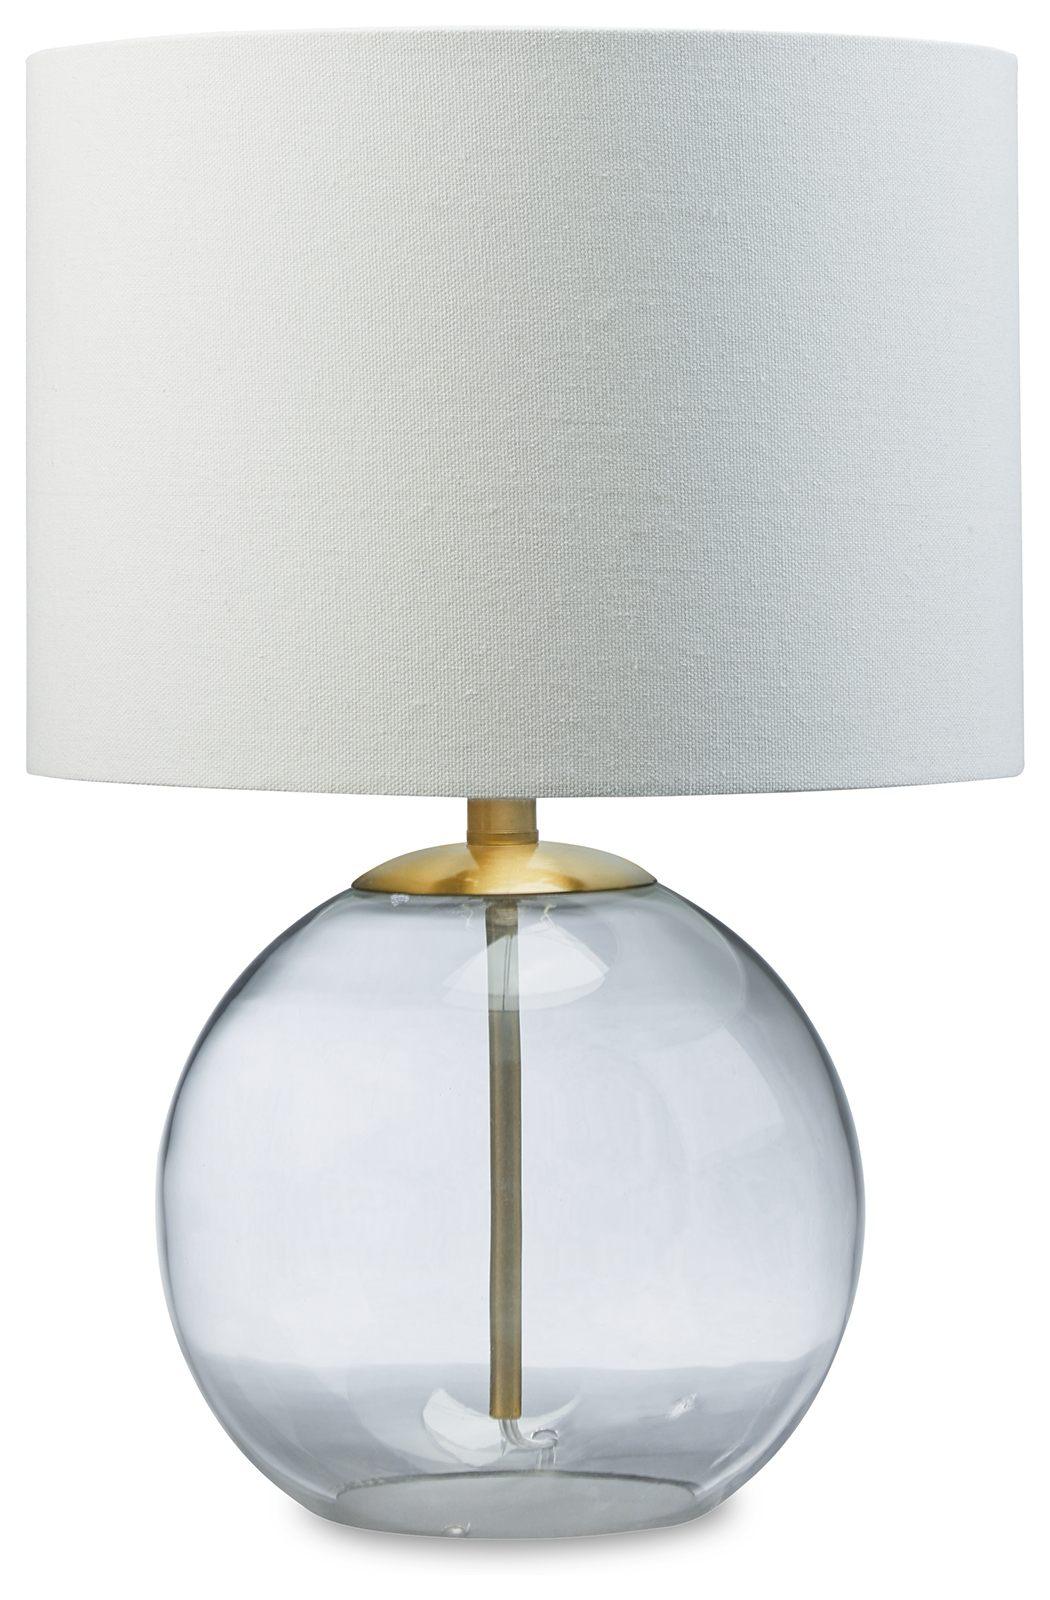 Samder - White - Glass Table Lamp Tony's Home Furnishings Furniture. Beds. Dressers. Sofas.